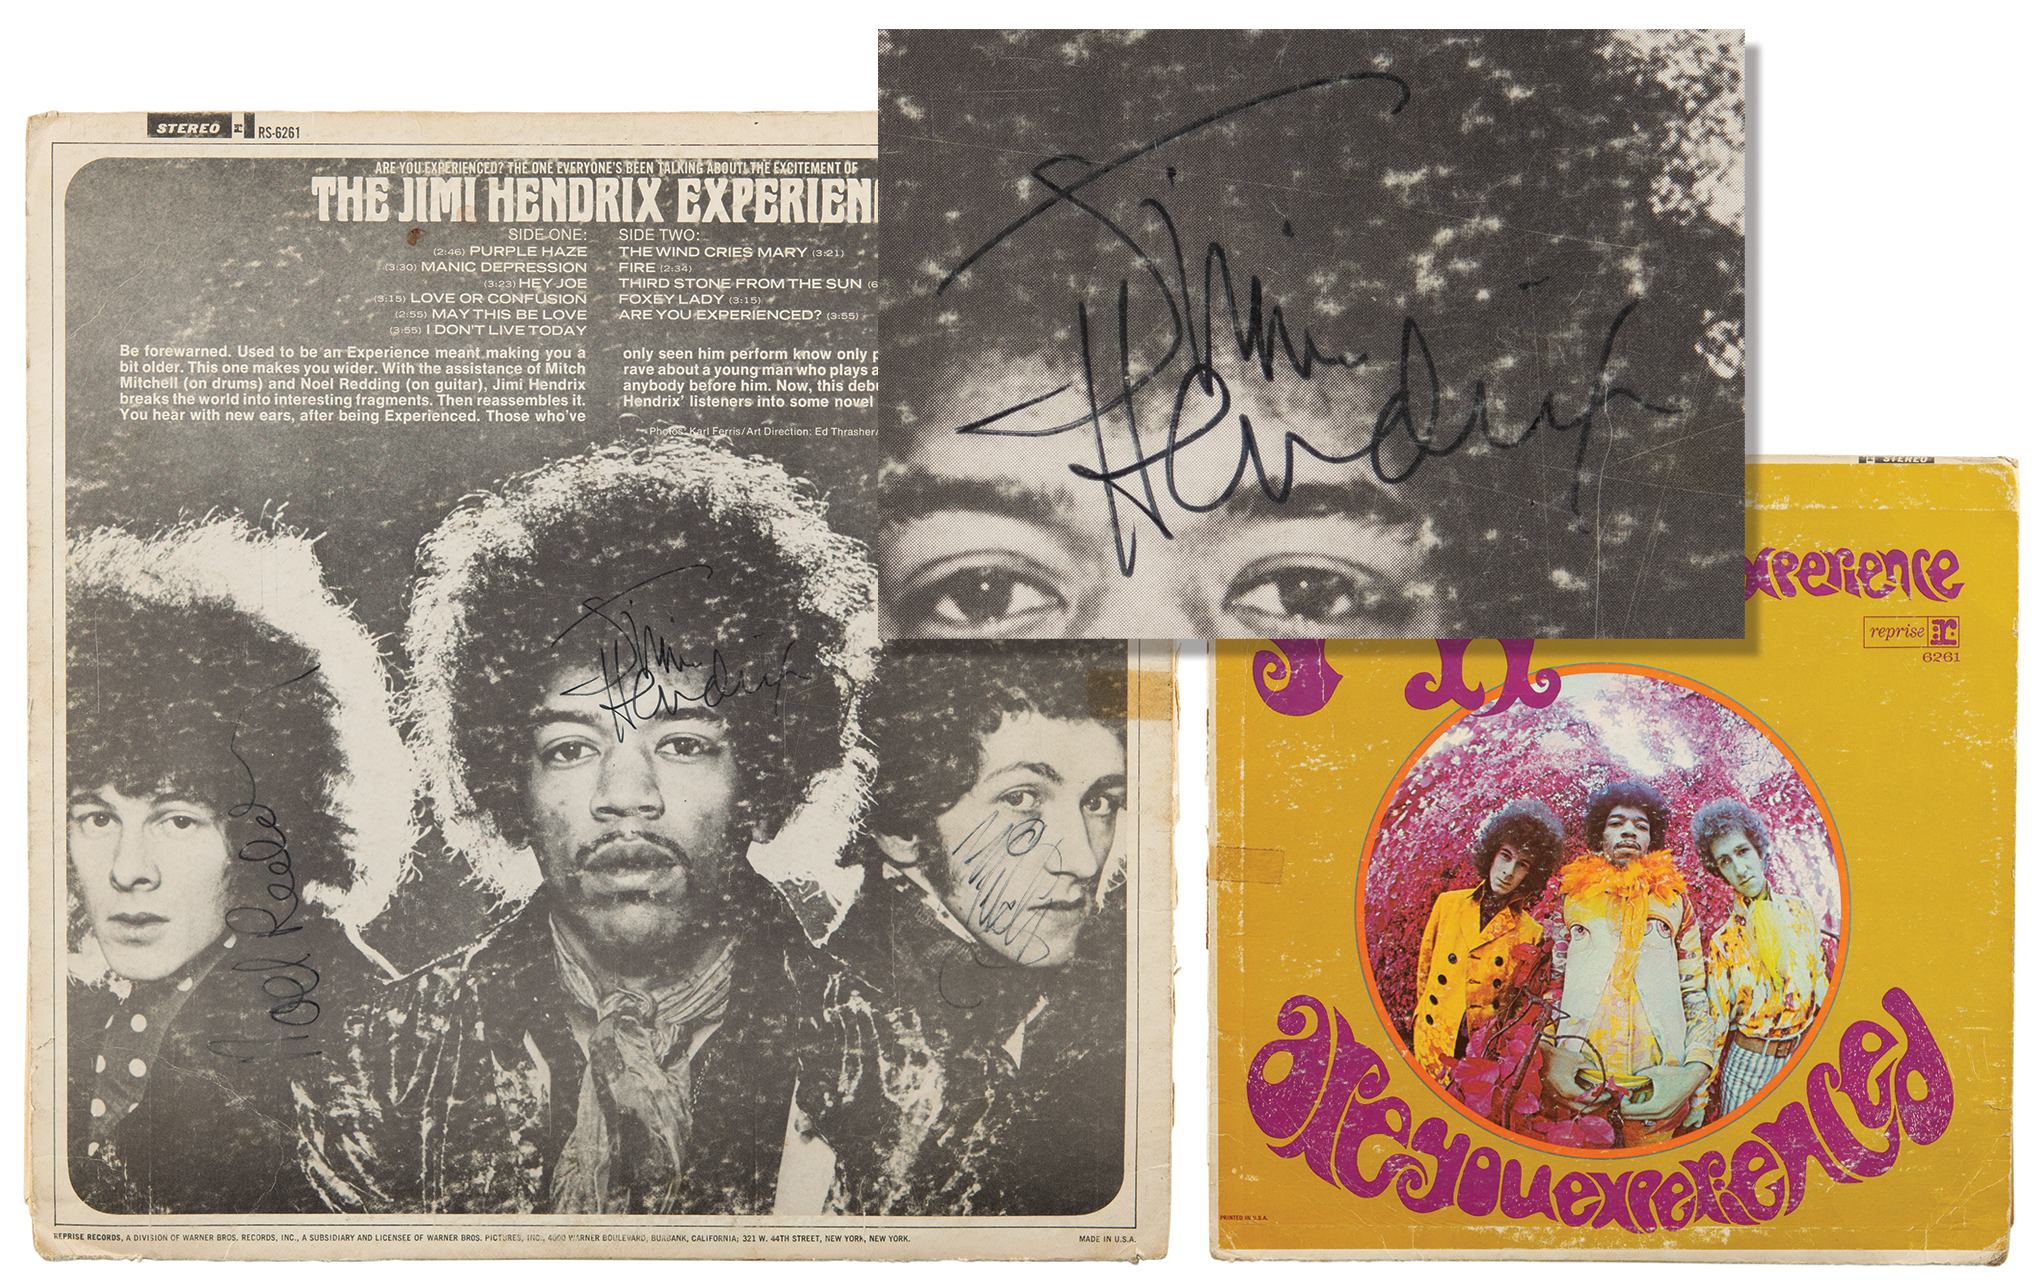 Lot #6086 Jimi Hendrix Experience Signed 'Are You Experienced' Album - Obtained at Hunter College in NYC on March 2, 1968 - Image 1